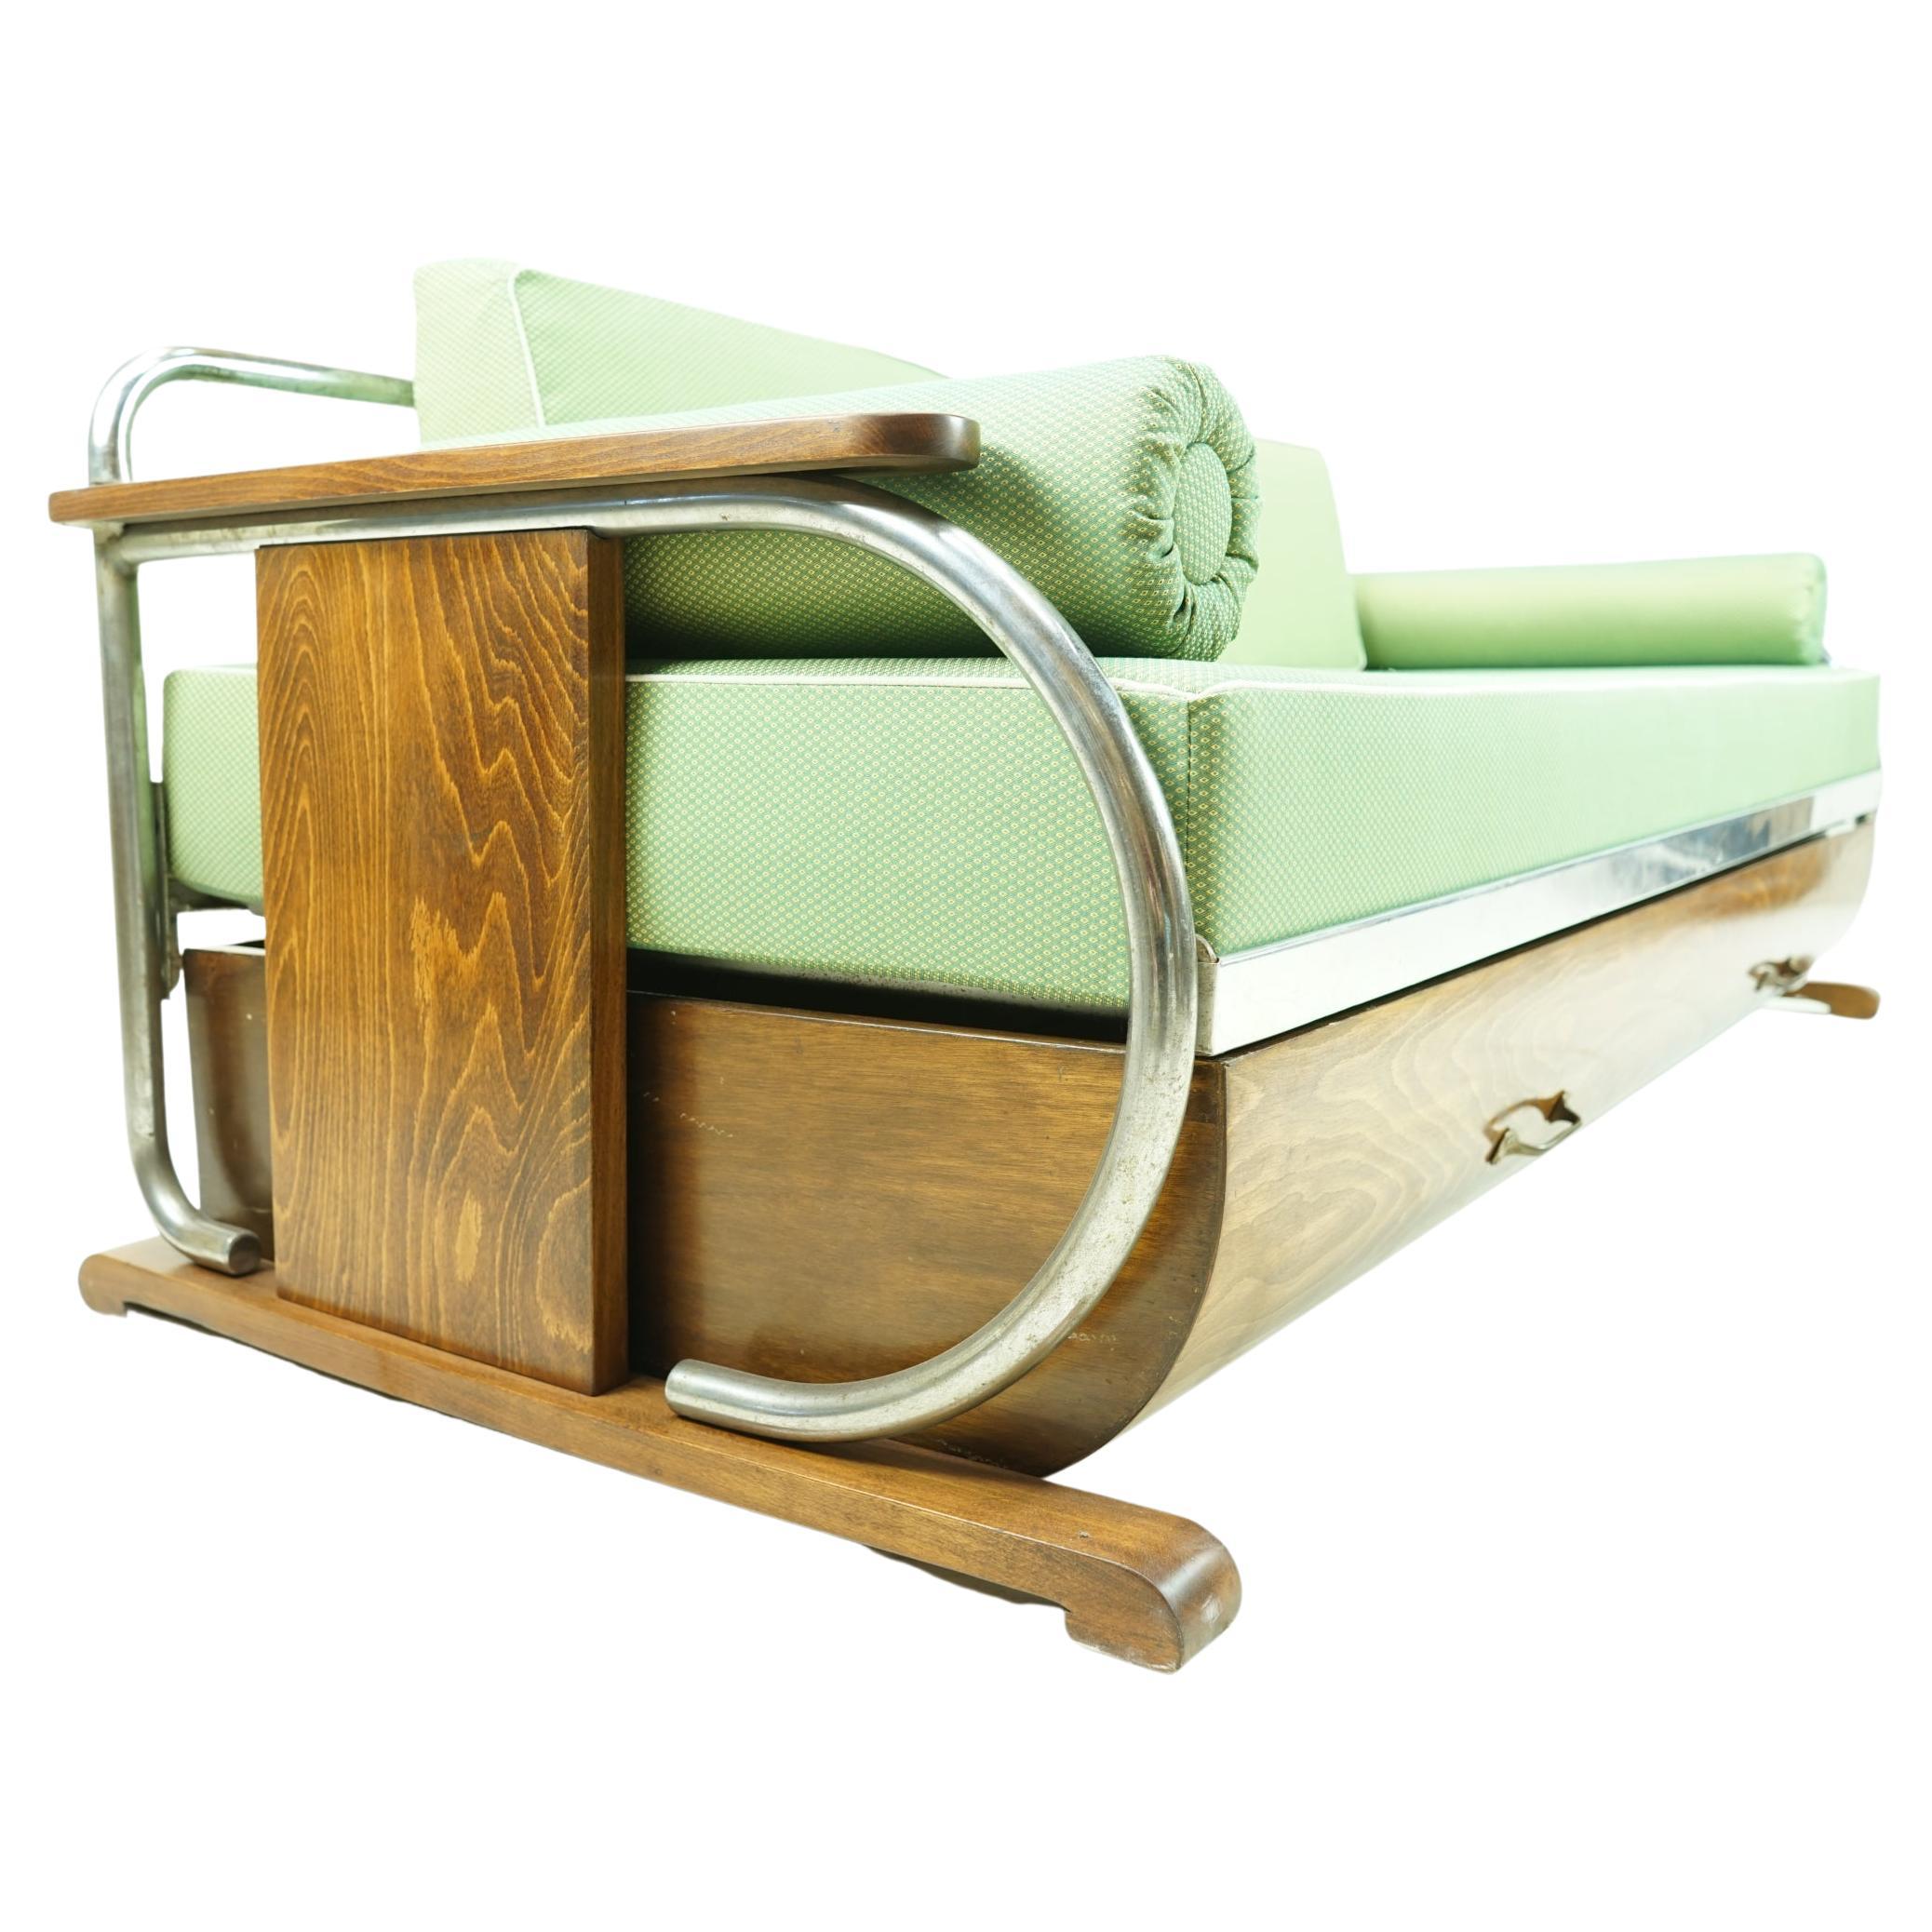 Bauhaus Sofa / Daybed by Gottwald with Drawer Box, 1935 For Sale